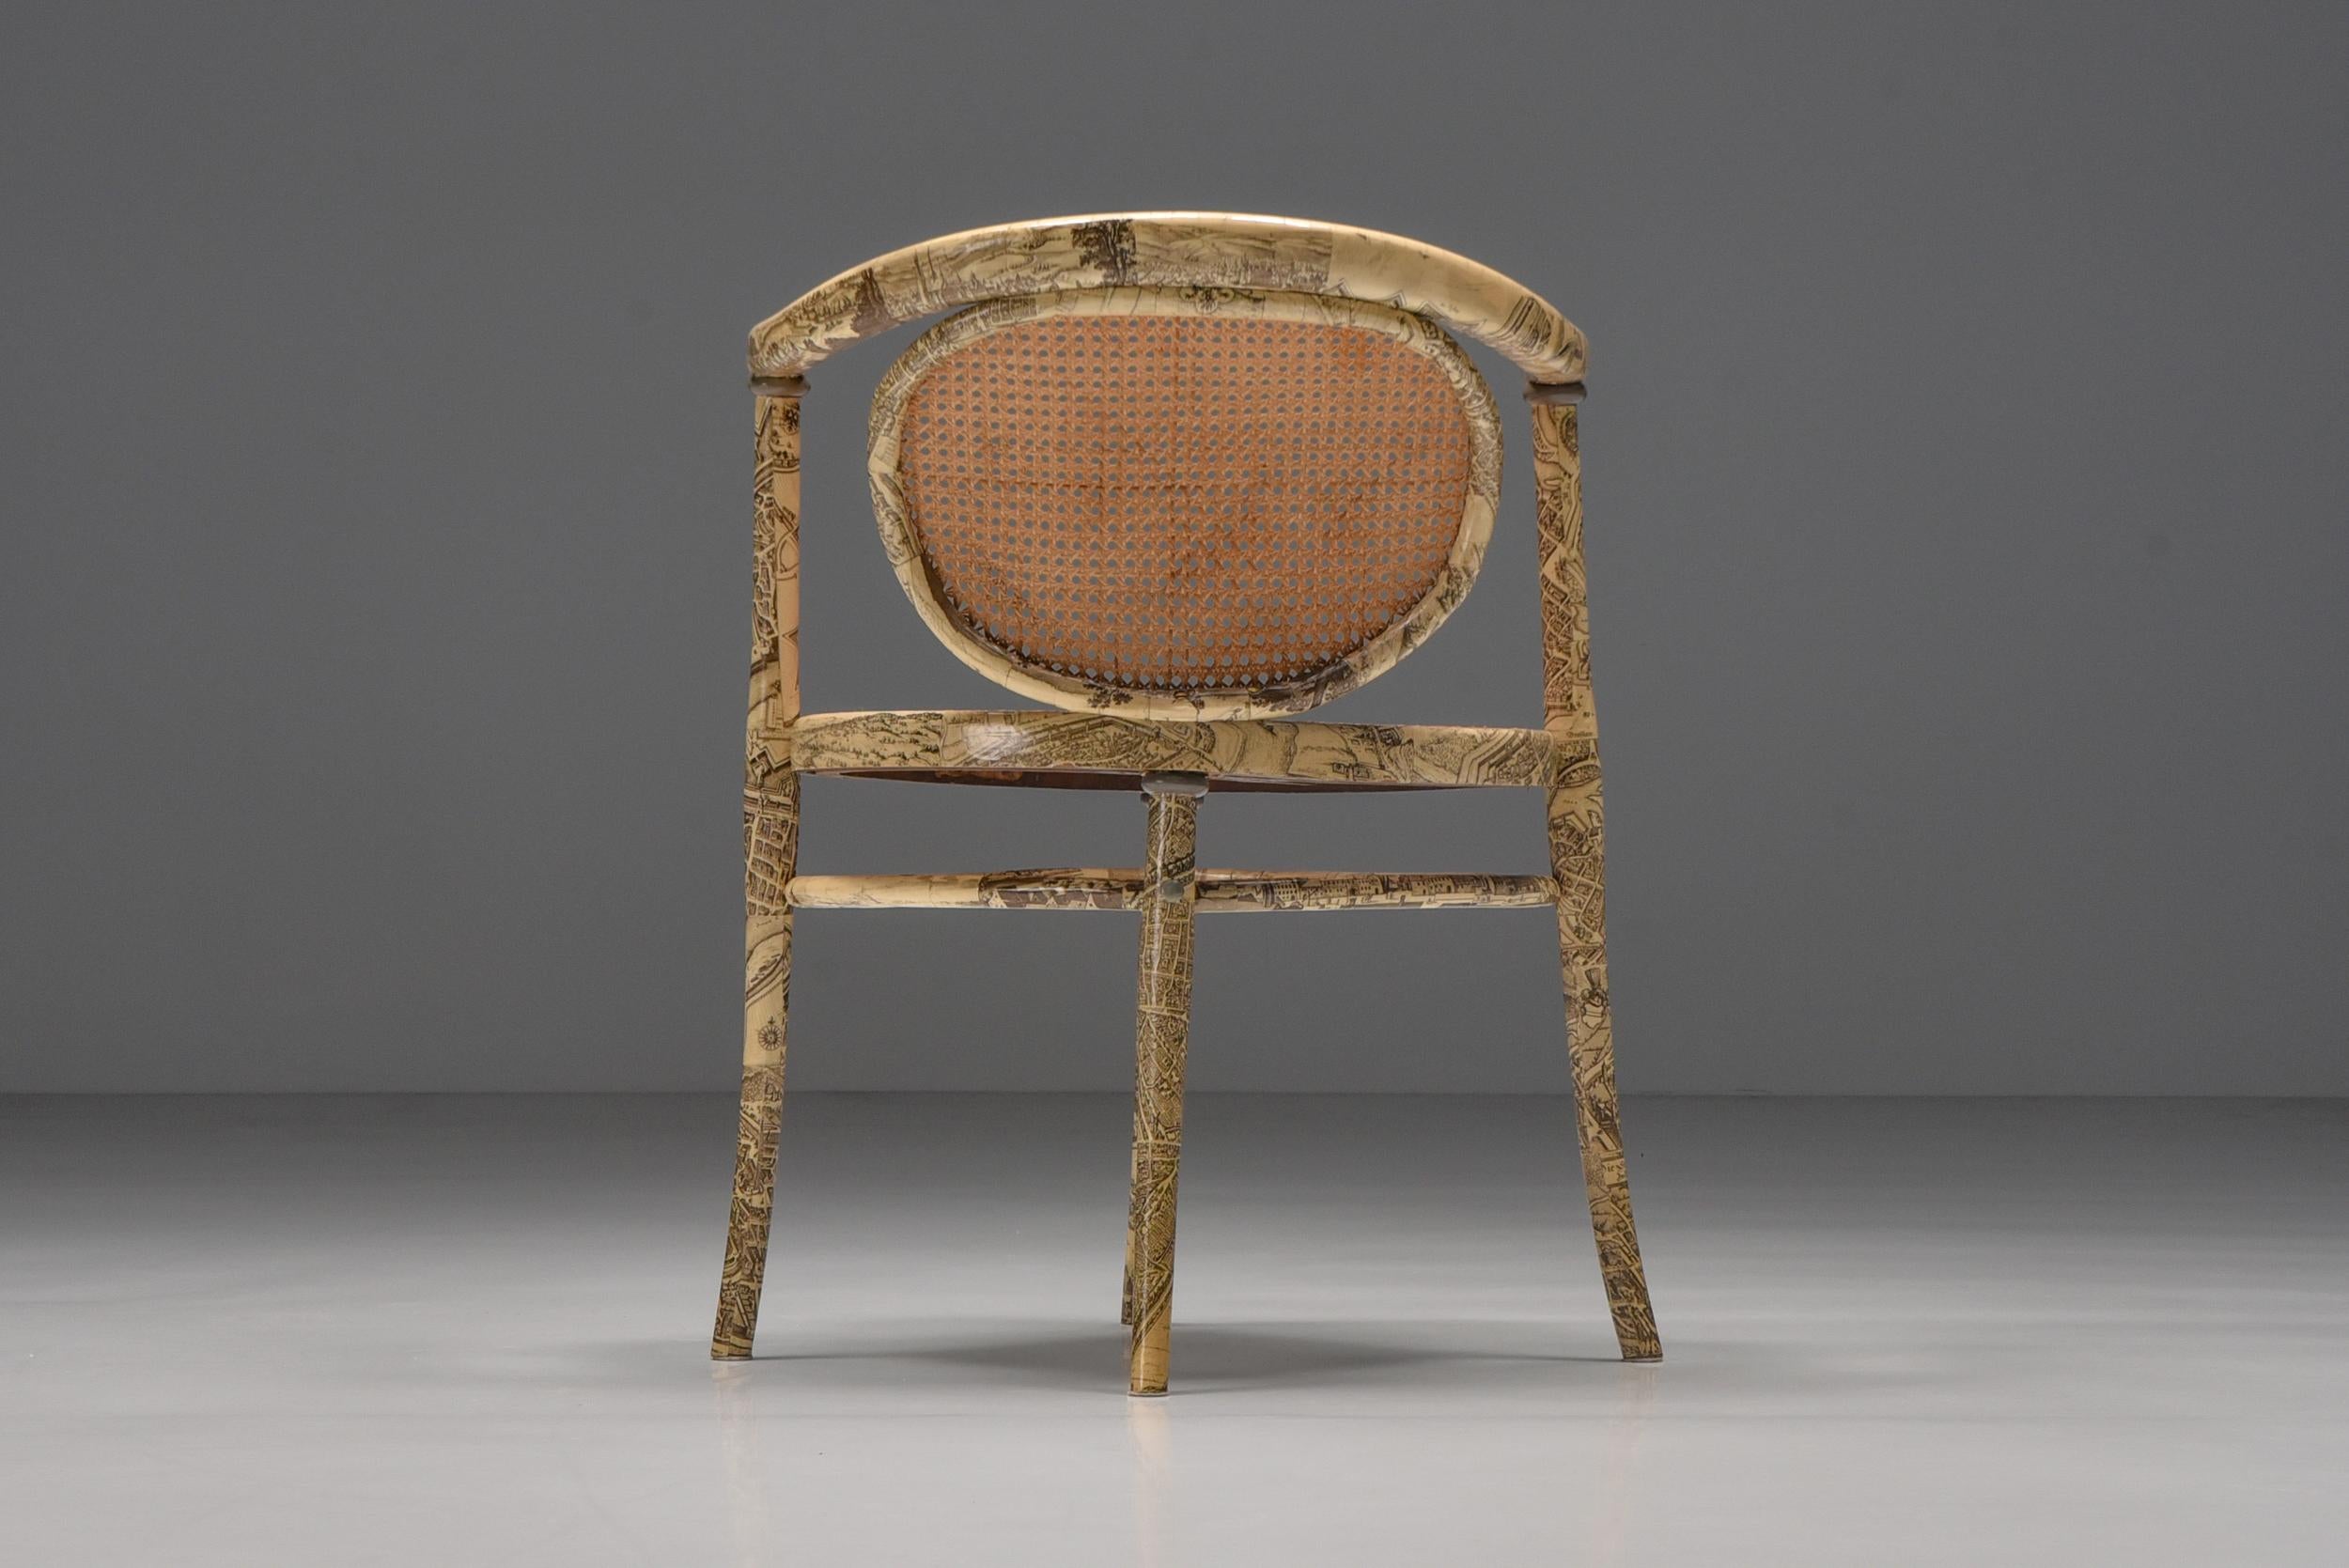 German Thonet Assymetrical Chair with Fornasetti Style Print, Empire, 1905